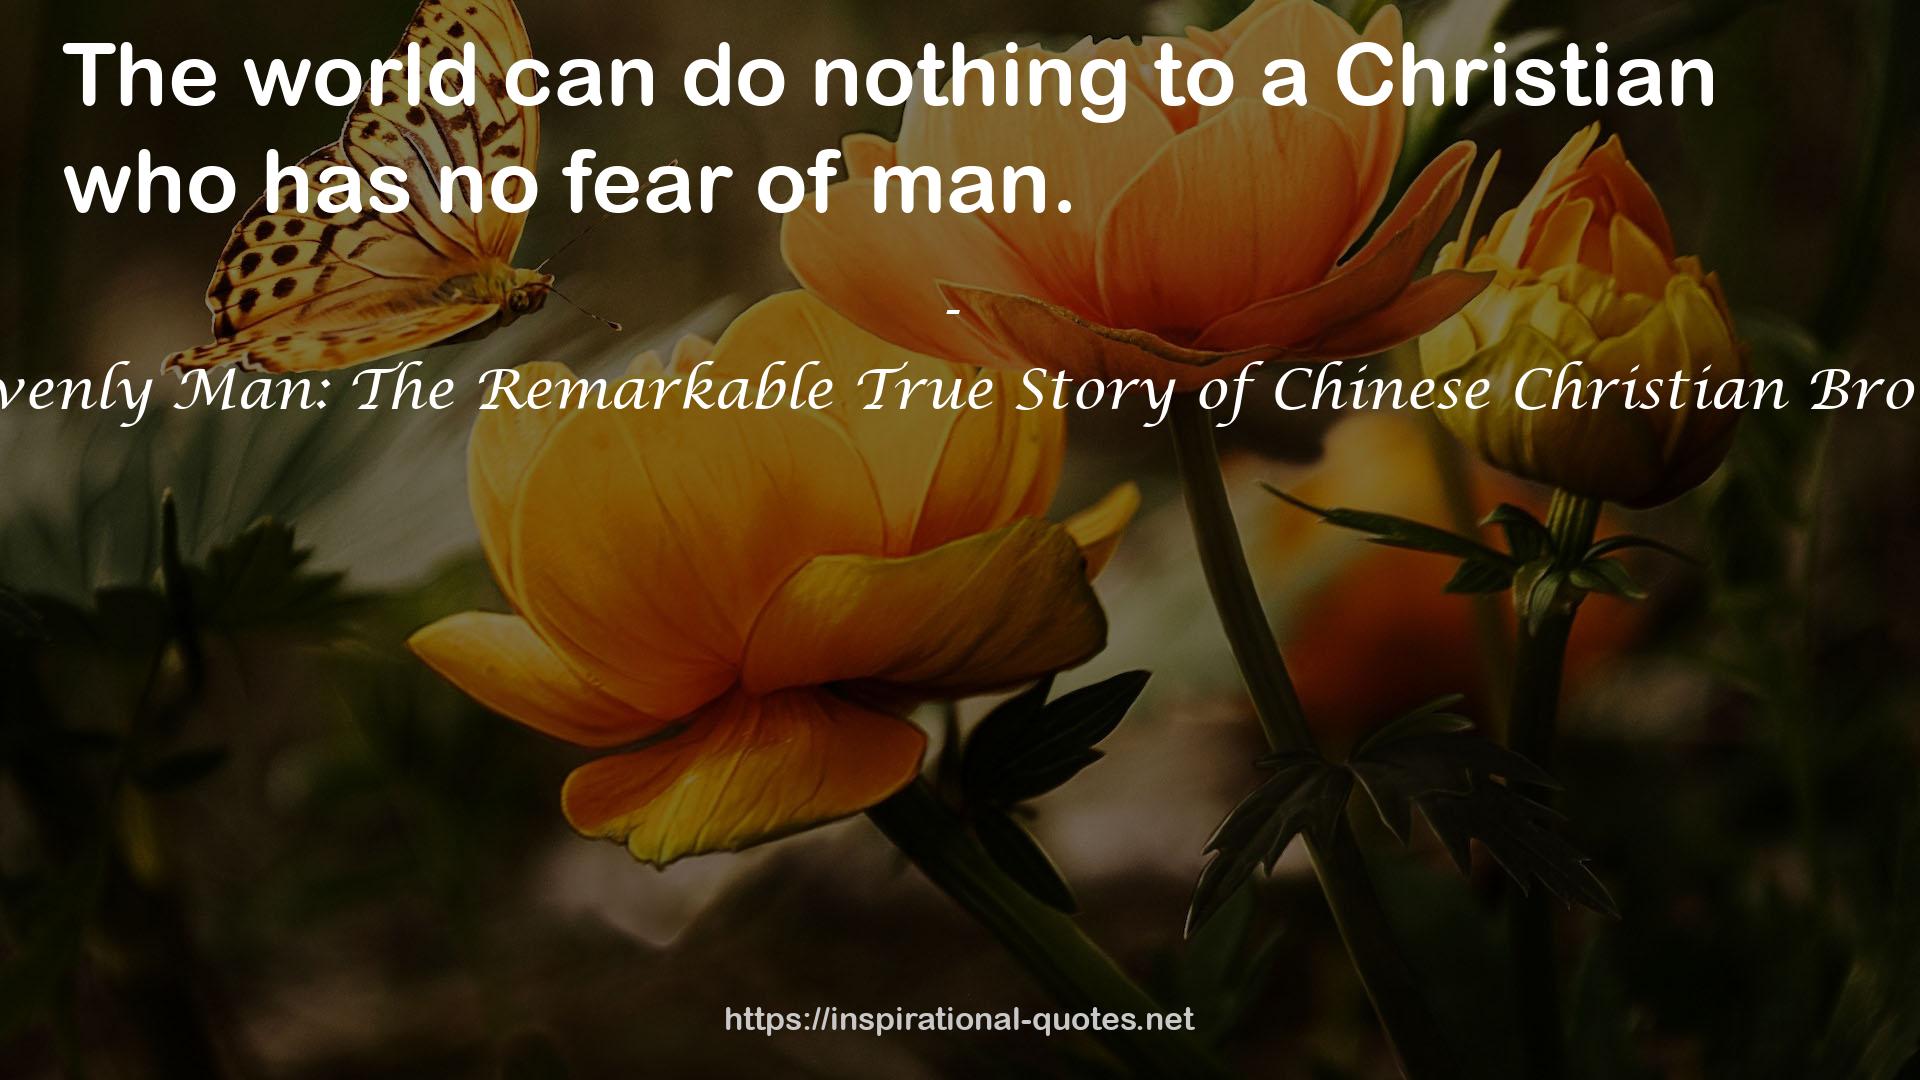 The Heavenly Man: The Remarkable True Story of Chinese Christian Brother Yun QUOTES